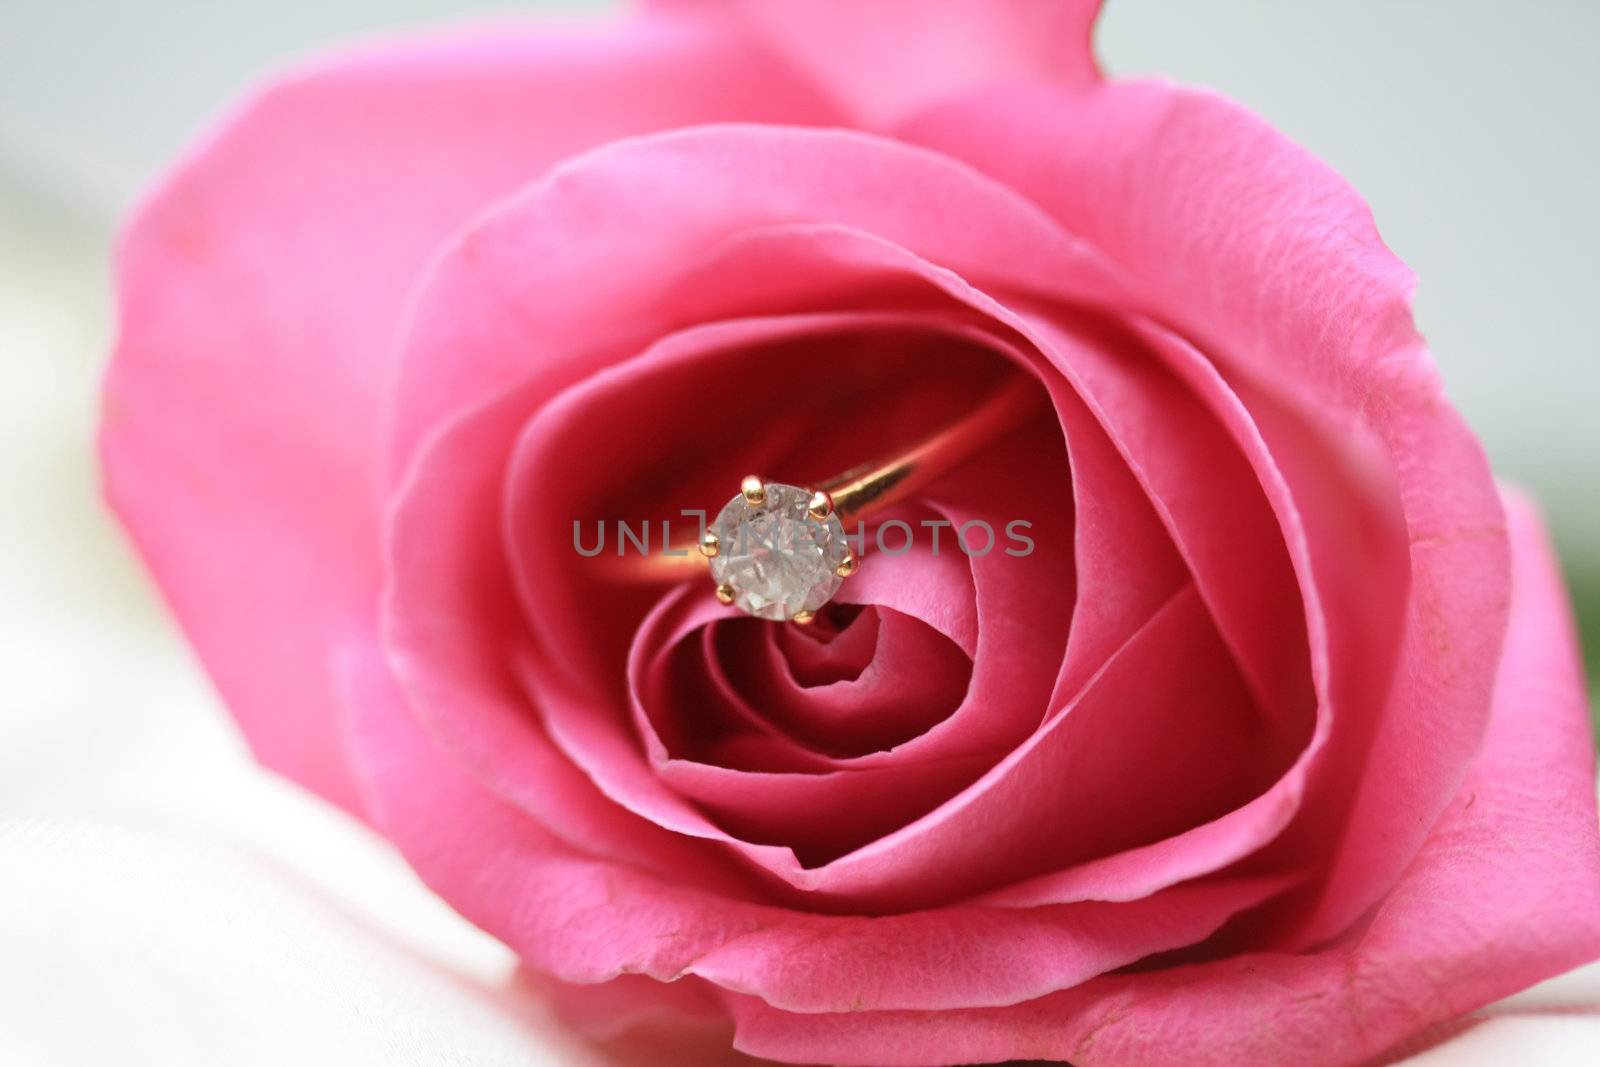 Diamond engagement ring in a pink rose by studioportosabbia